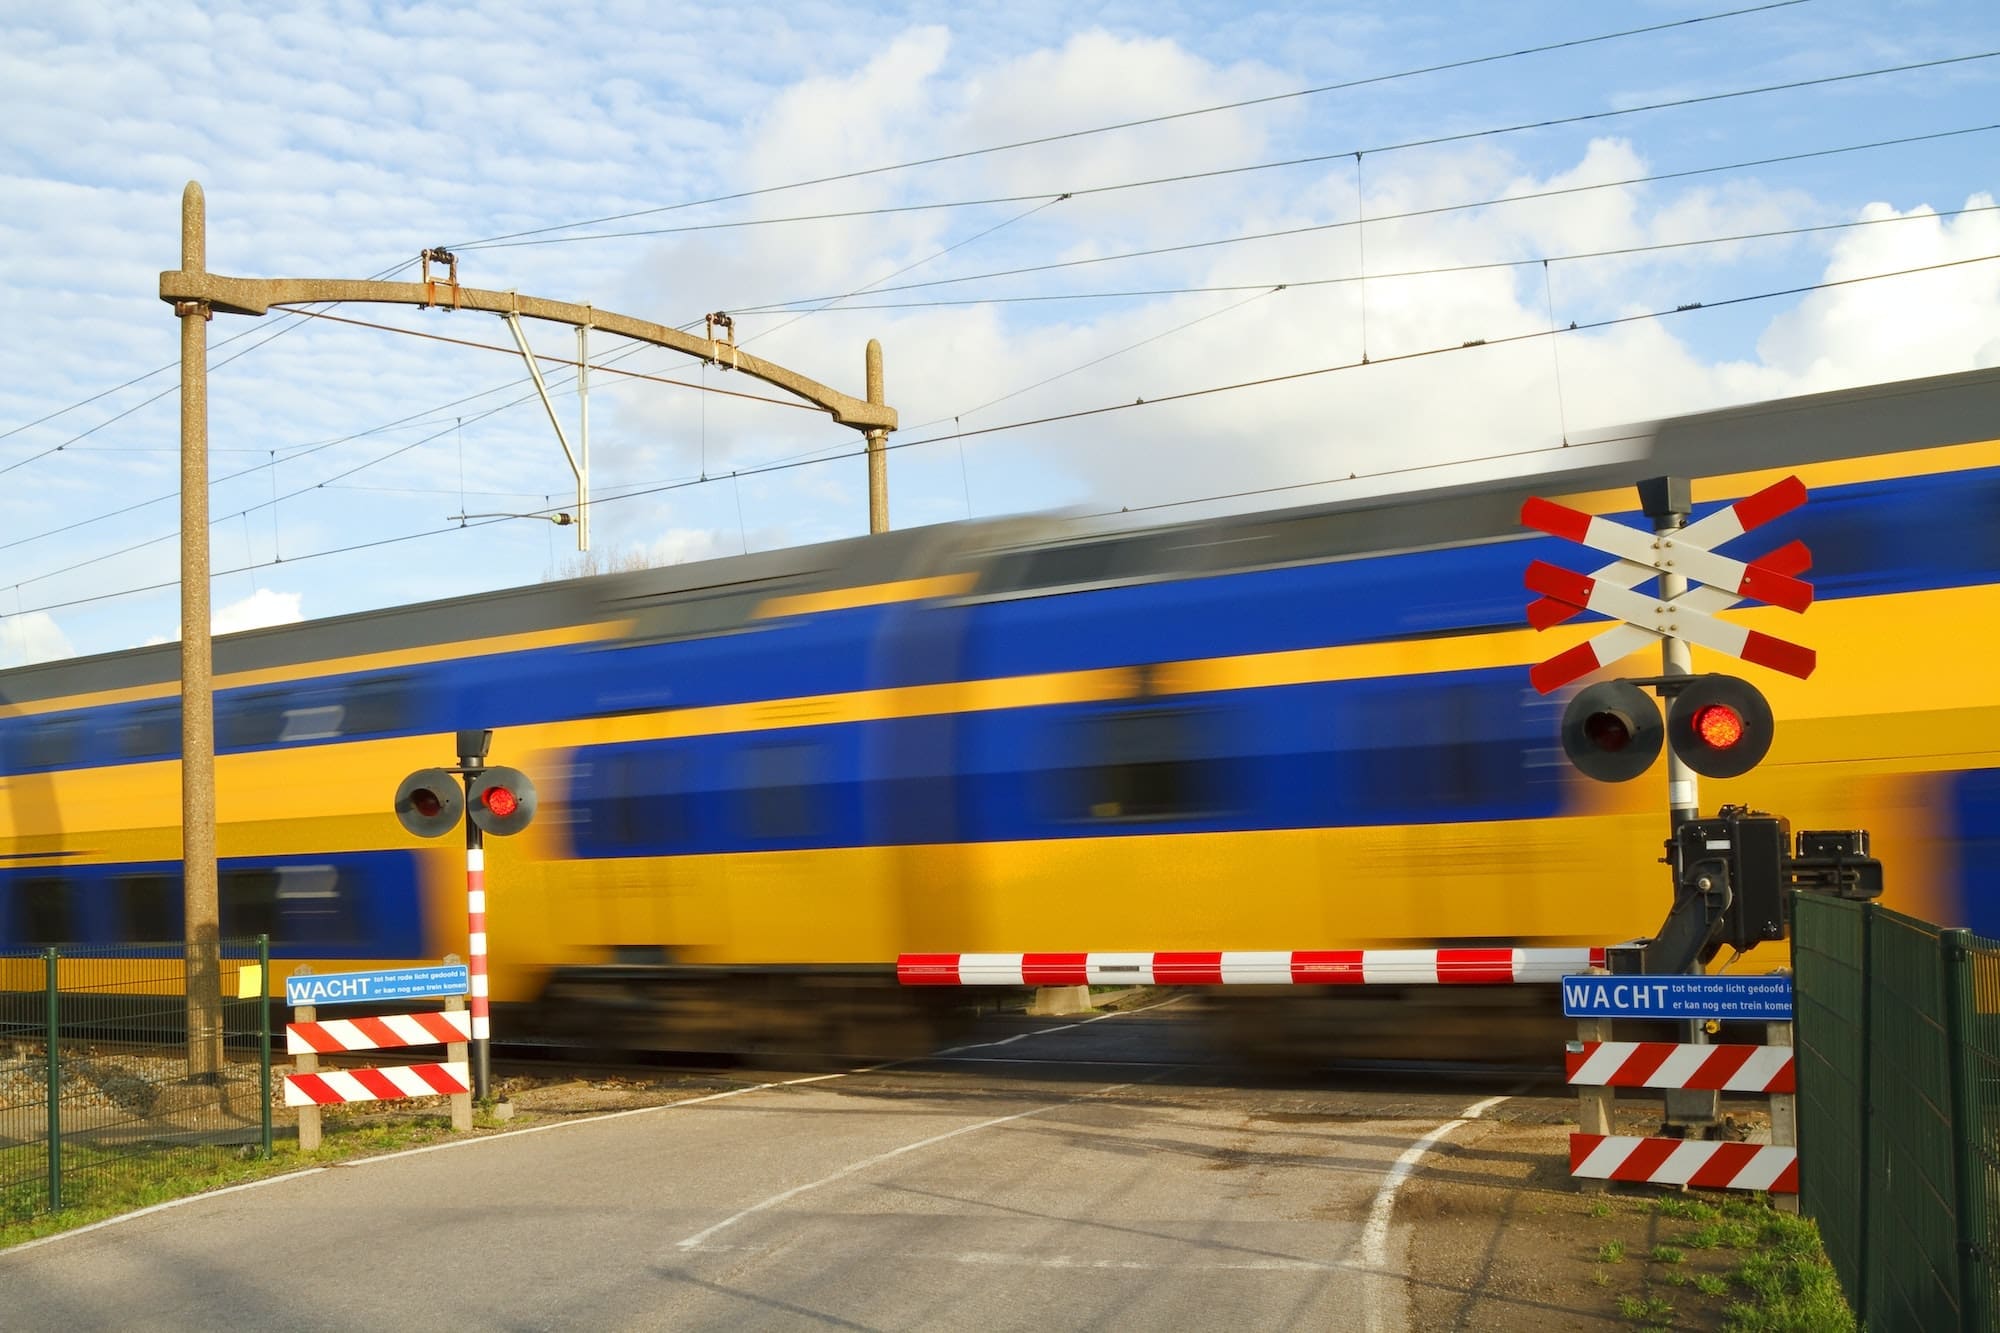 Dutch NS blue and yellow intercity express train passing railway crossing at high speed.